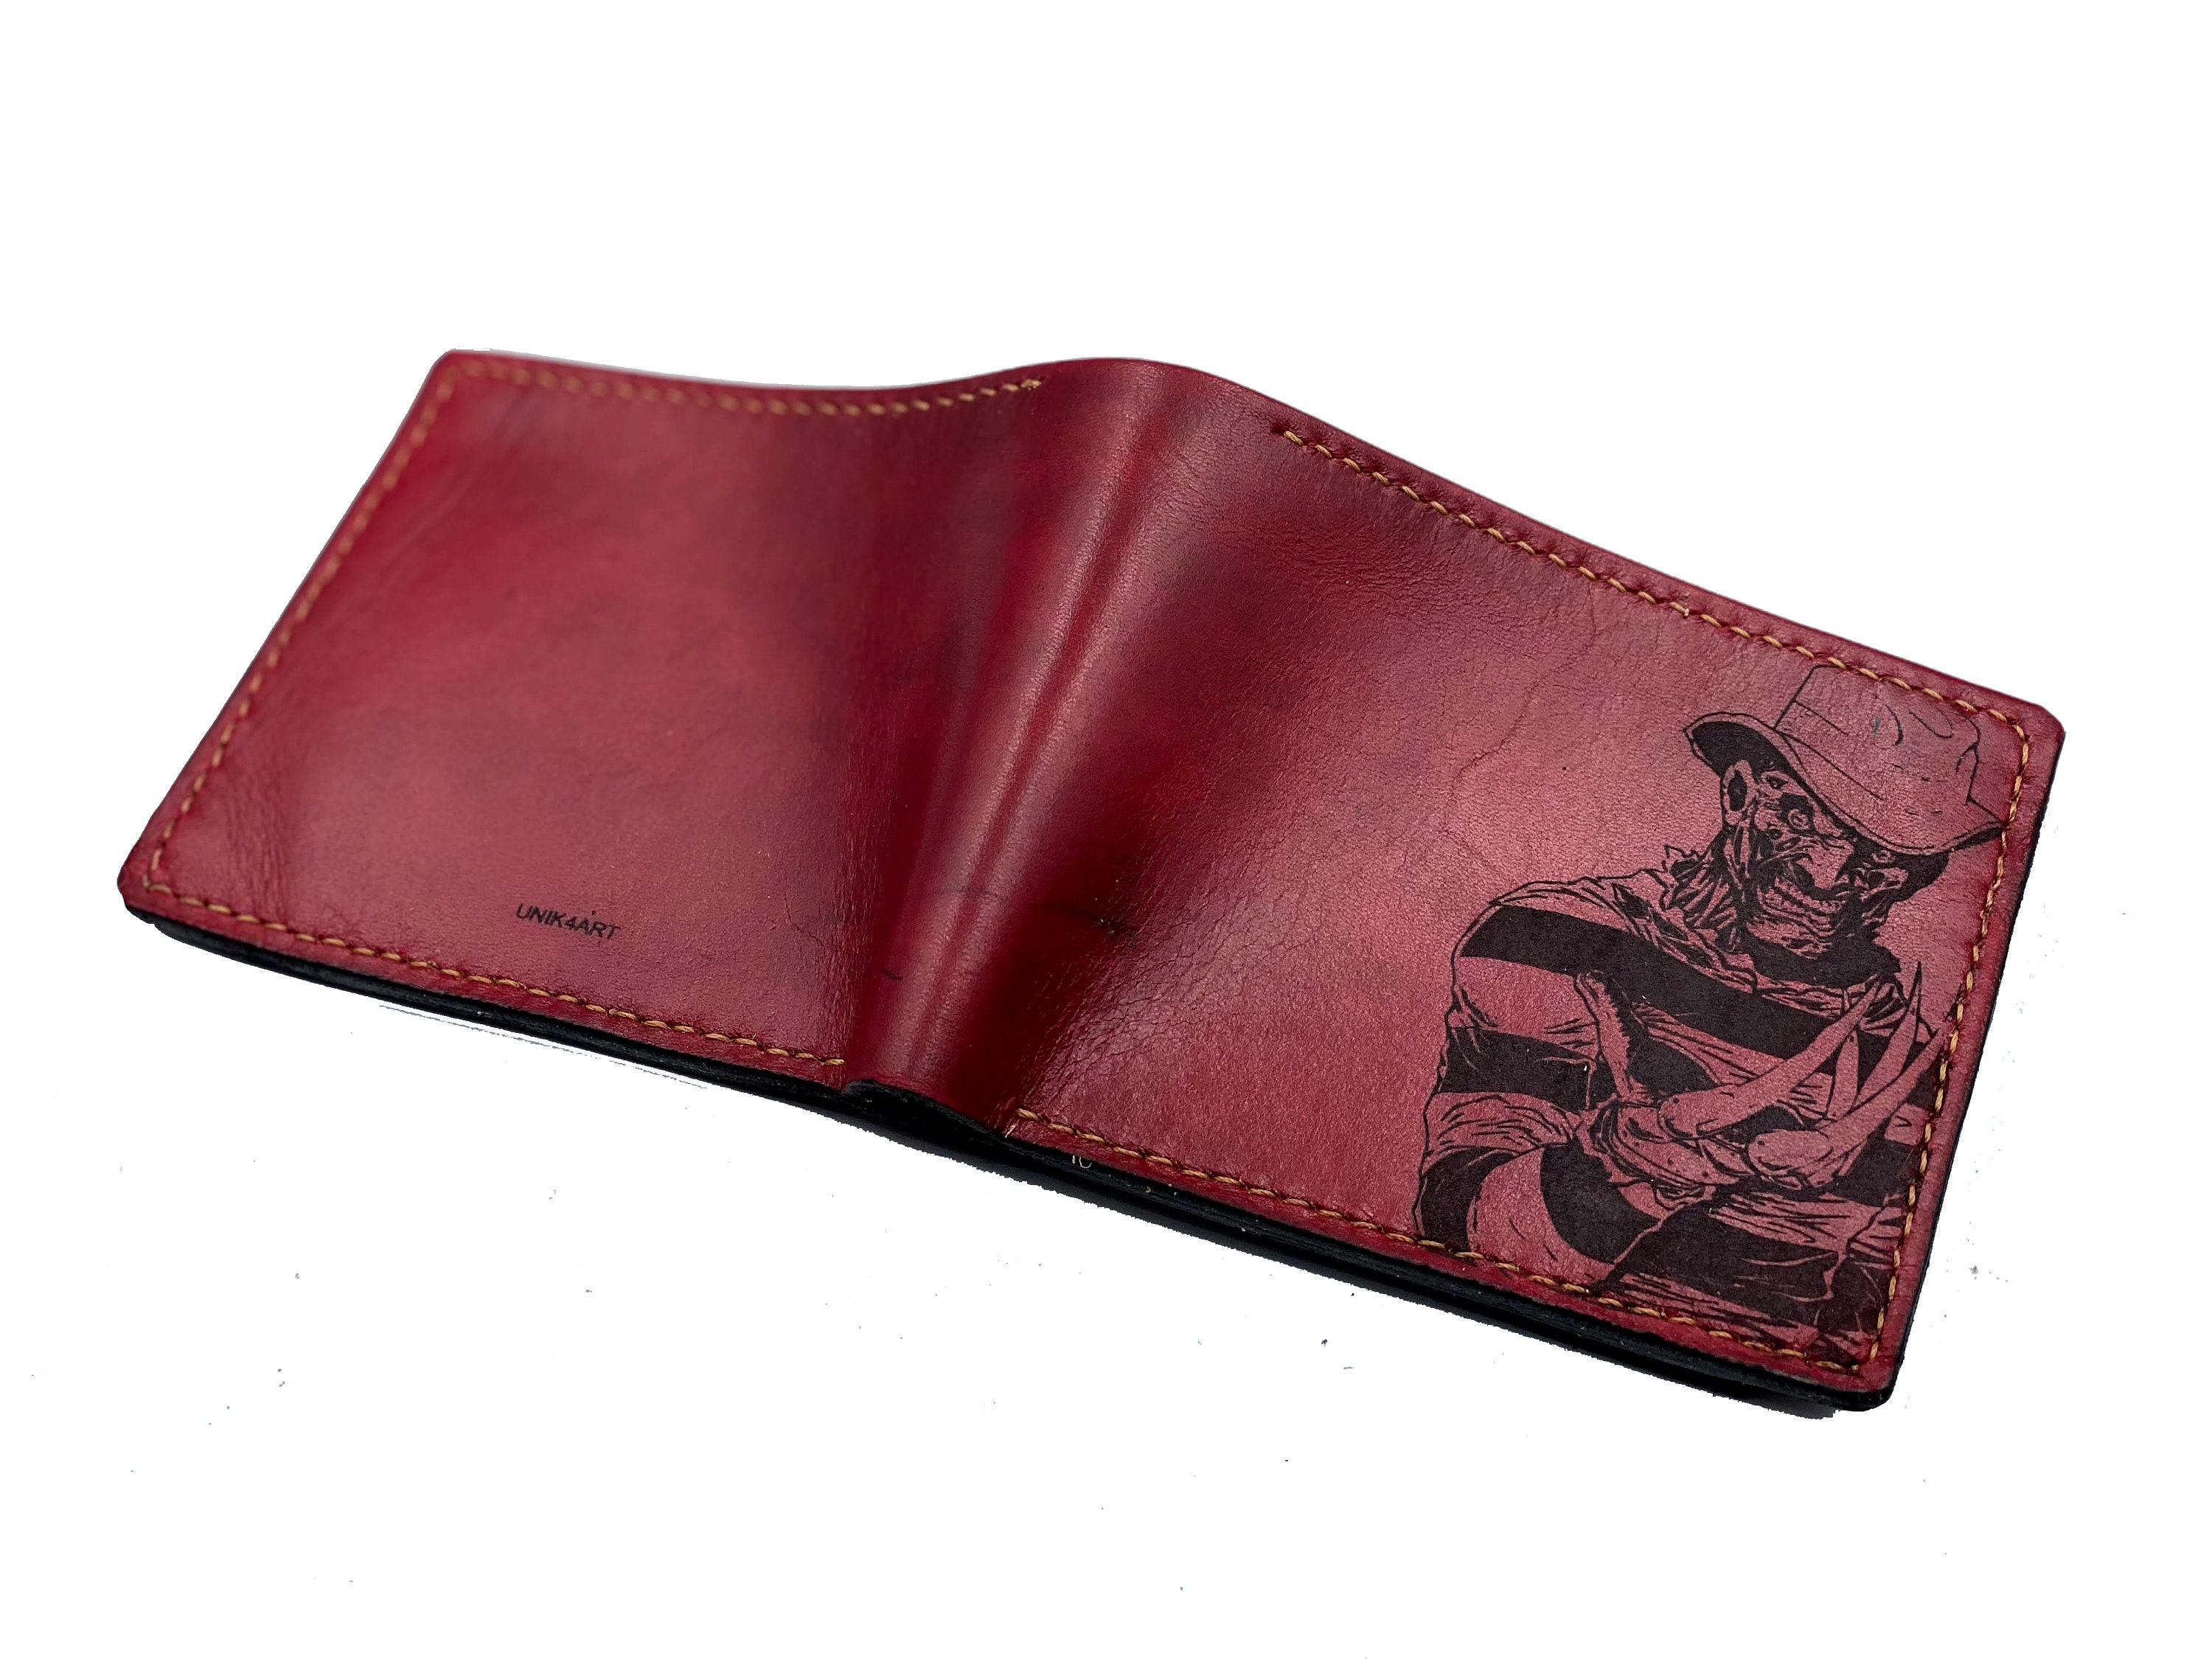  Men's 3D Genuine Leather Wallet, Hand-Carved, Hand-Painted,  Leather Carving, Custom wallet, Personalized wallet, Predator, Alien :  Handmade Products